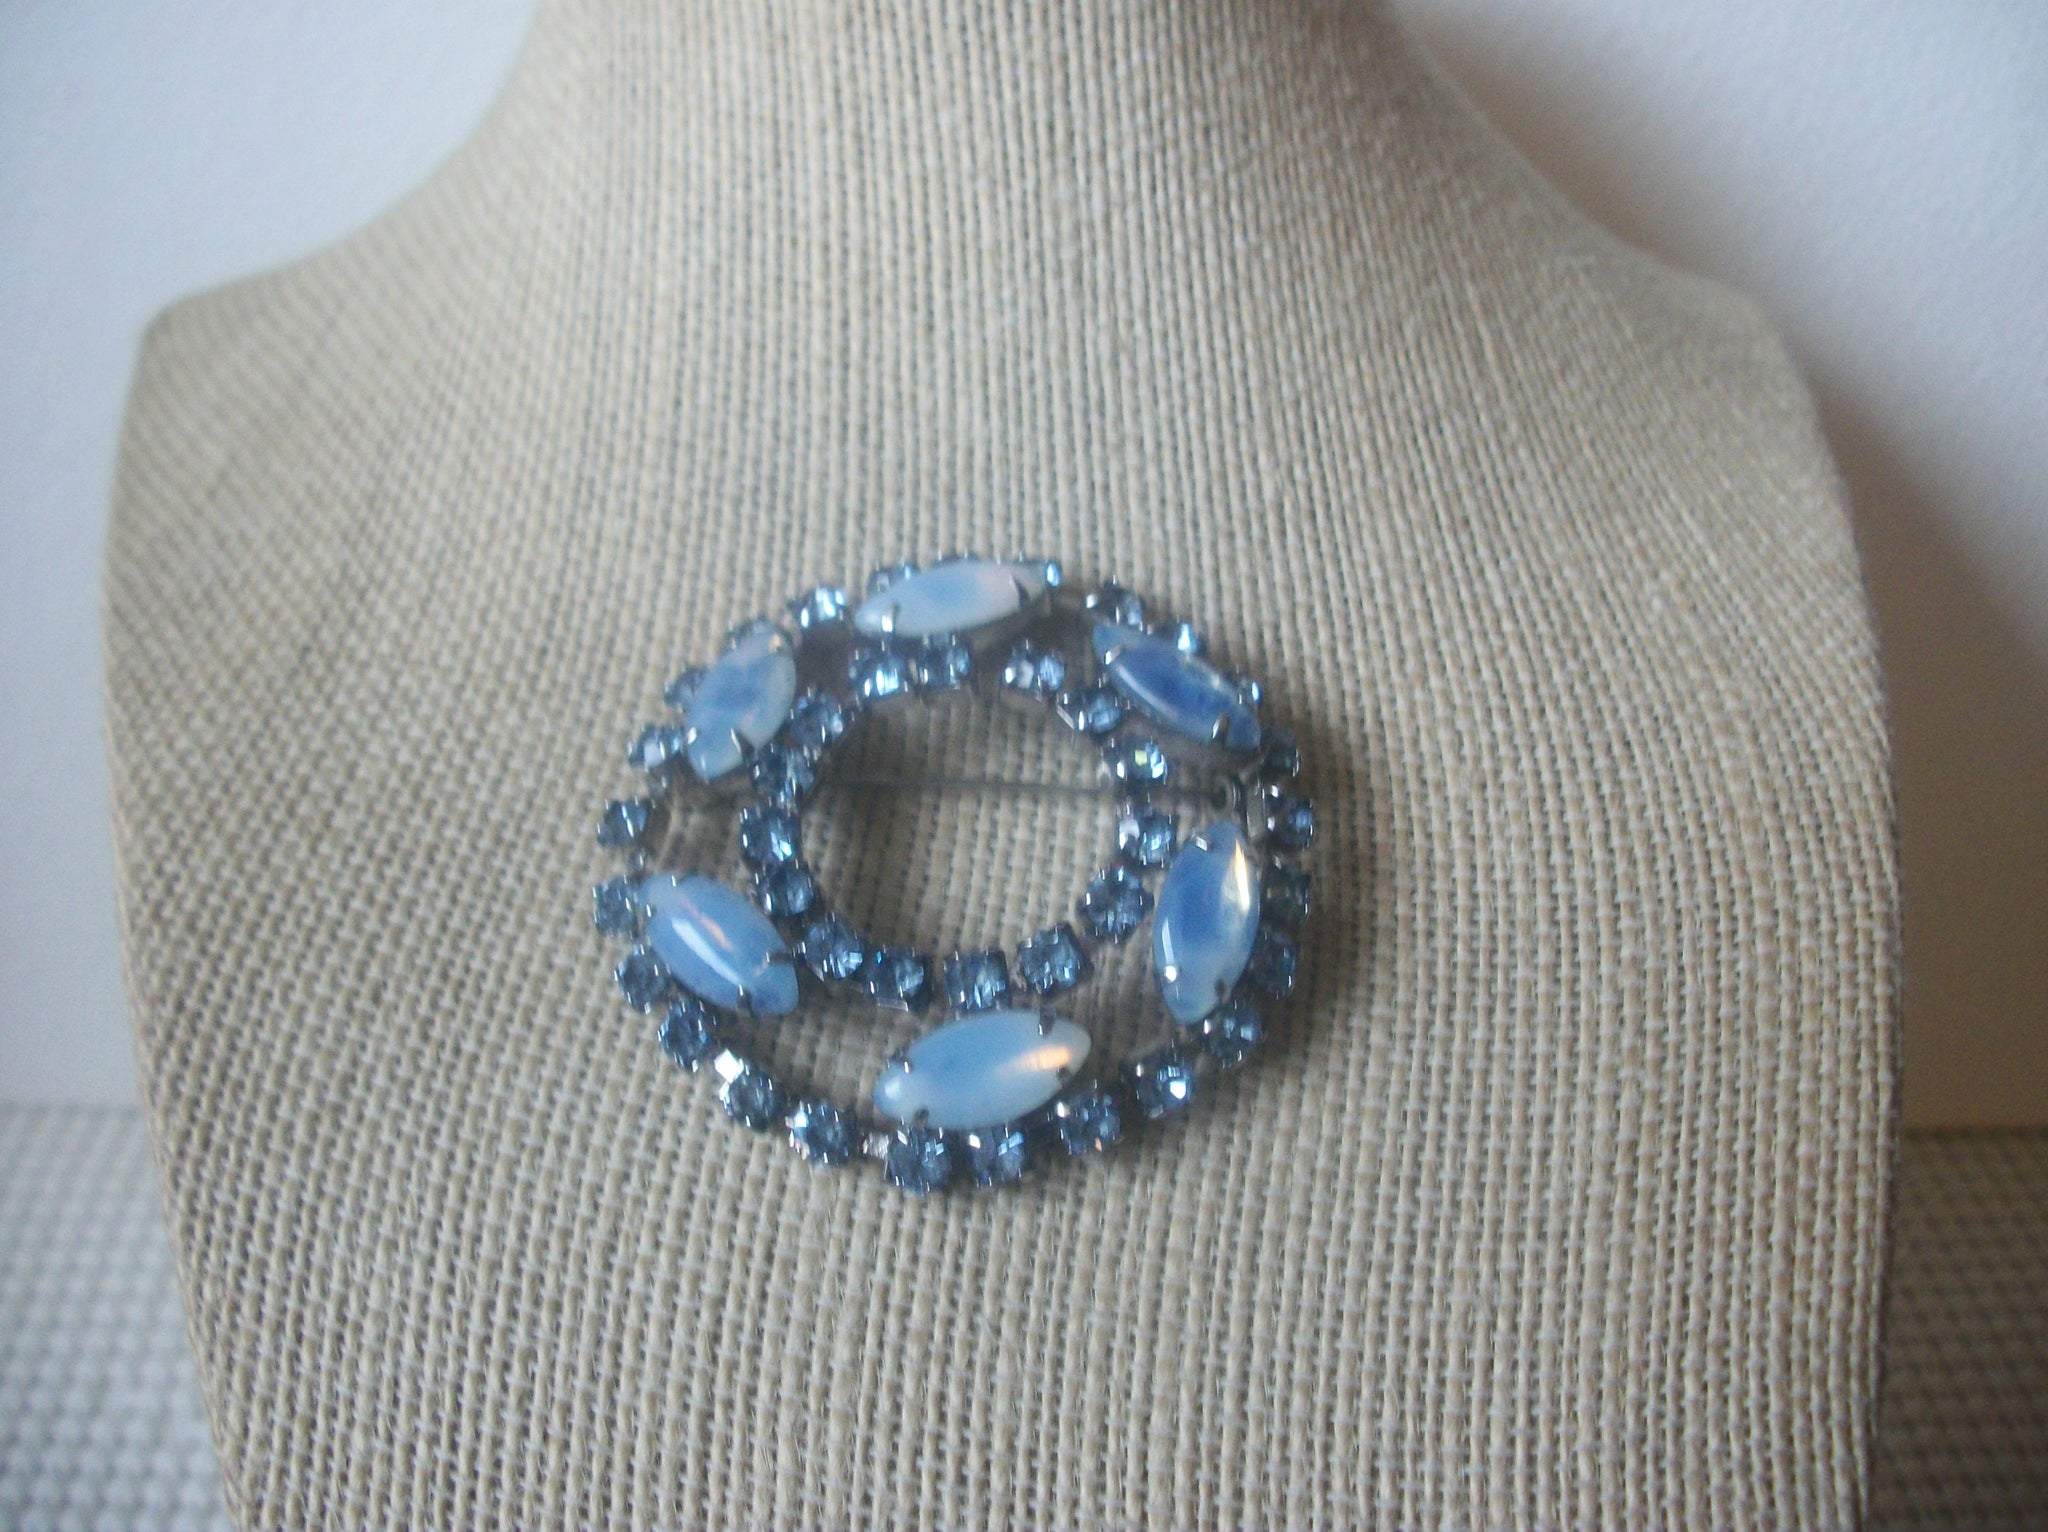 Icy Blue Moon glow Glass Silver Tone Prong Set Mid Century Vintage Pin Brooch 022121